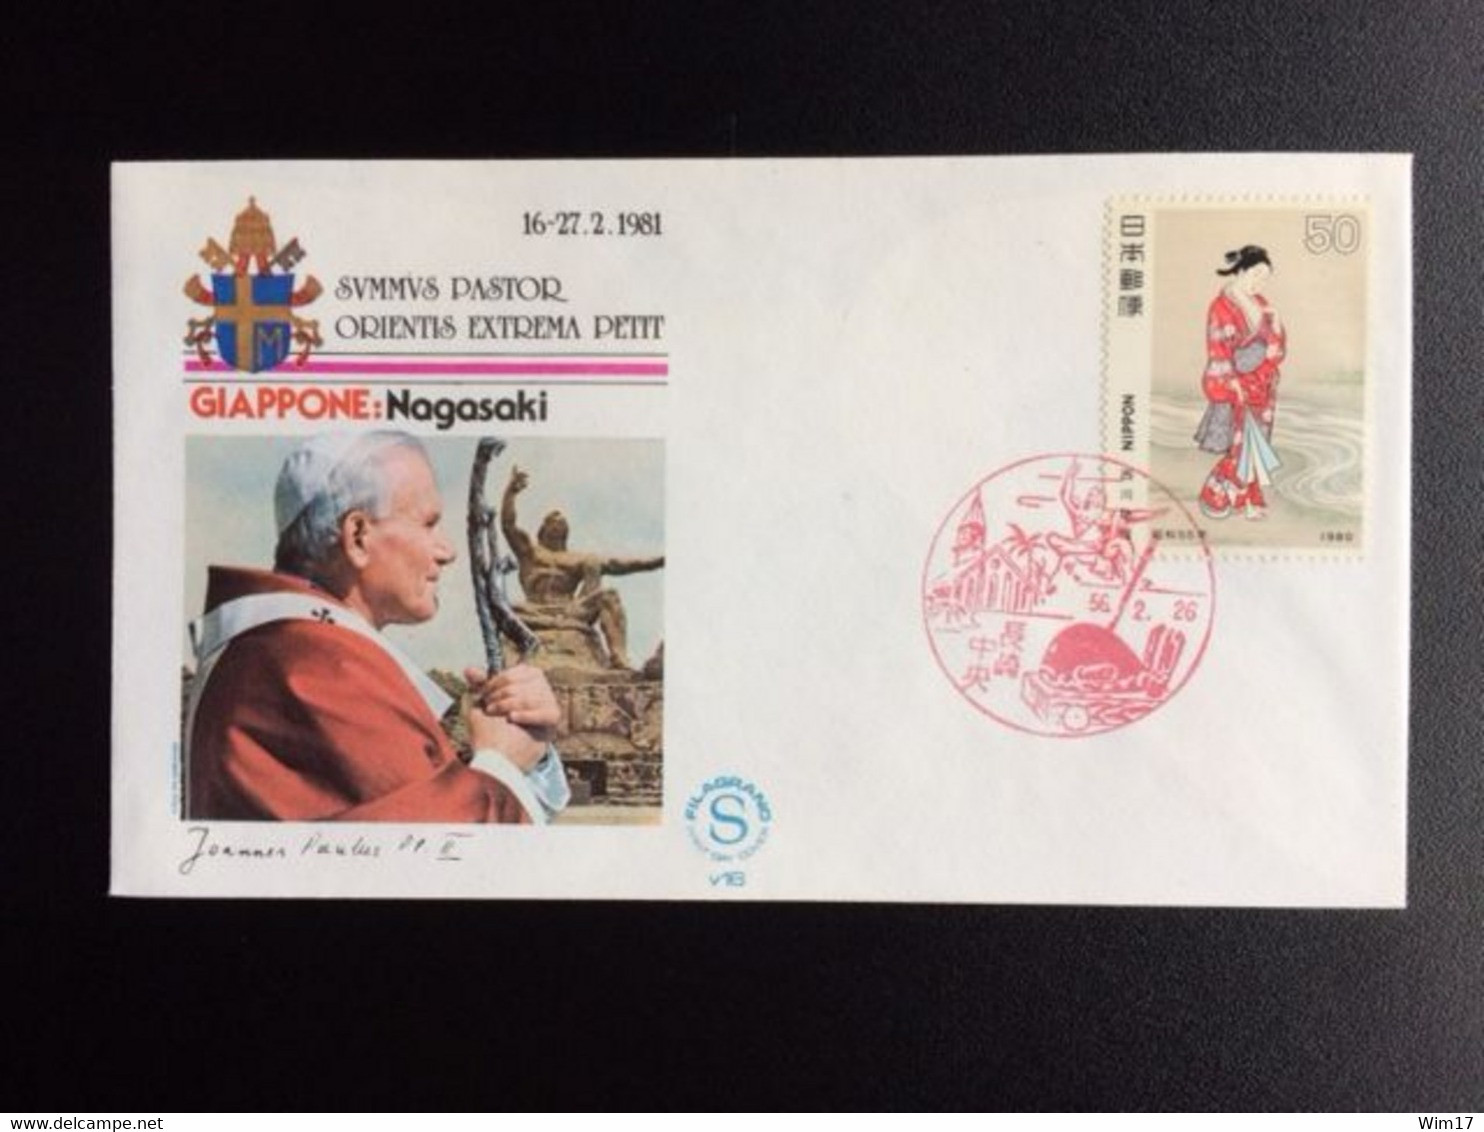 JAPAN 1981 POPE VISIT TO JAPAN 16-27 FEBR. 1981 - Covers